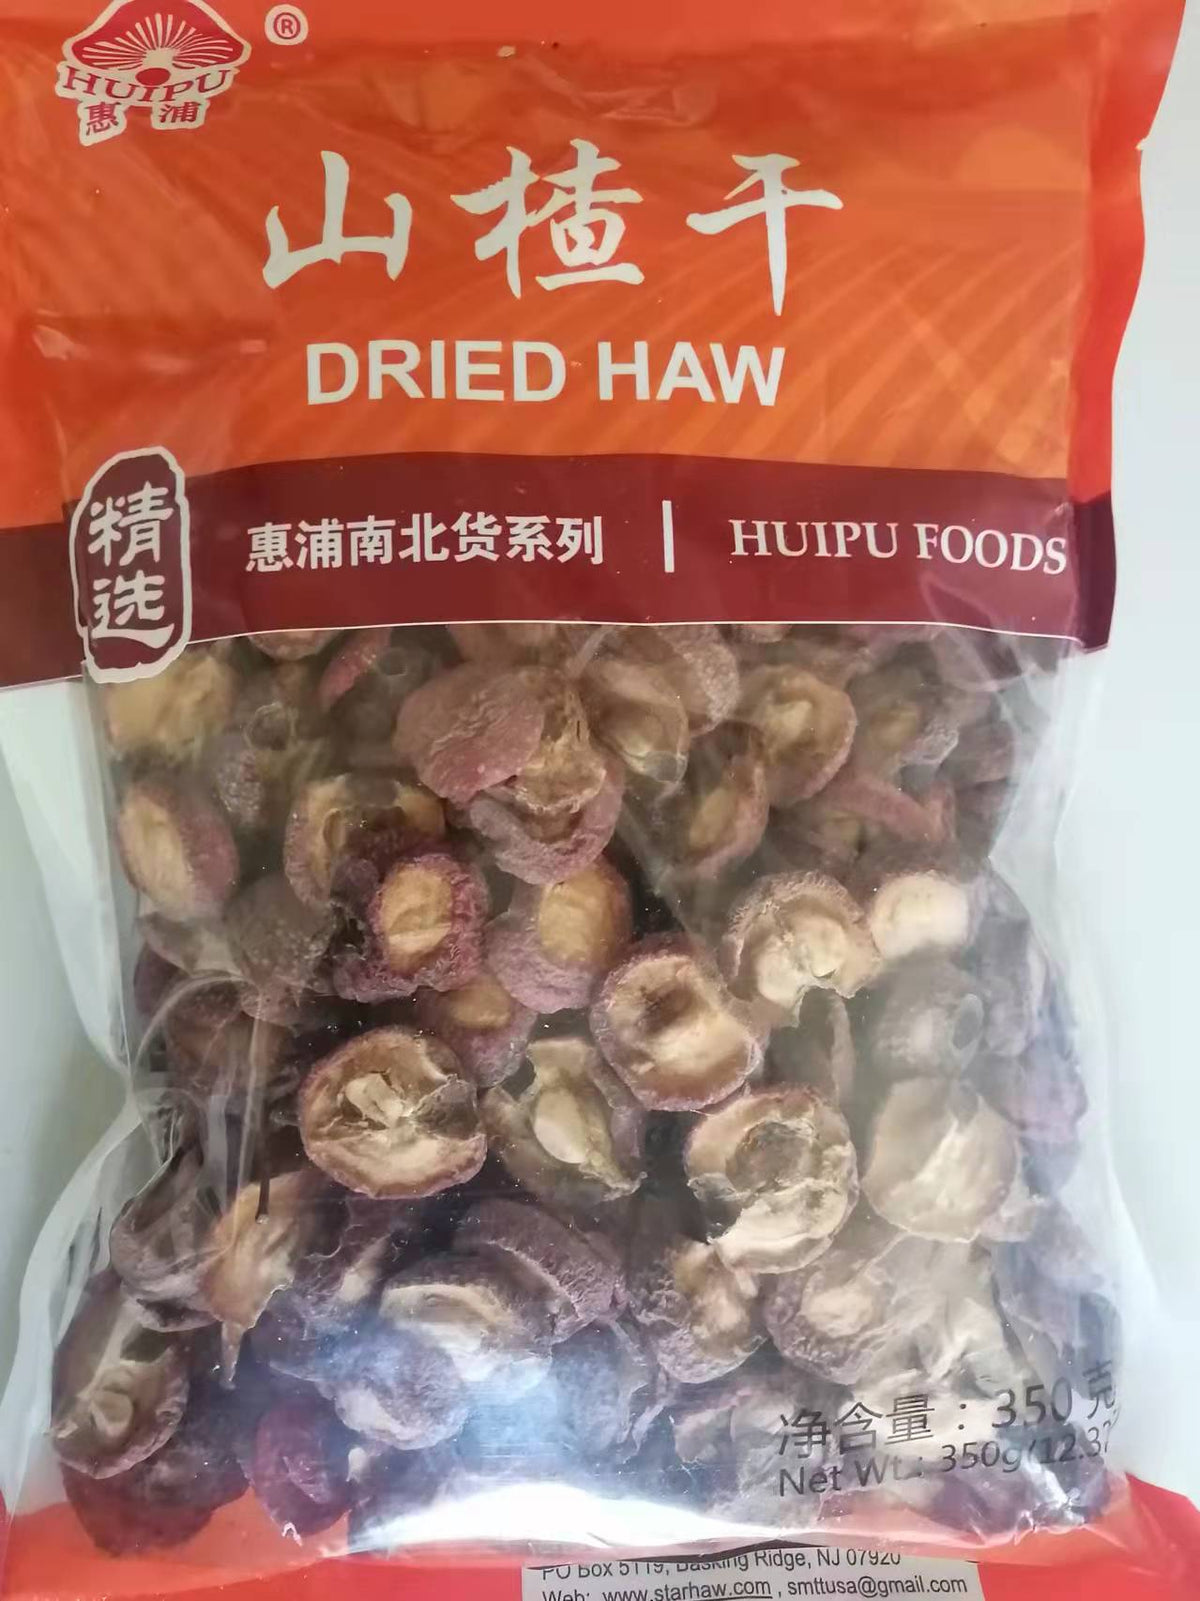 A010 - 350g (12 Oz) HAWTHORN BERRIES DRIED - NO 1 DETOX THAT IMPROVES DIGESTION OF FAT(ONE 12 OZ BAG, 350 G, UP TO 2 MONTHS OF DAILY USE)